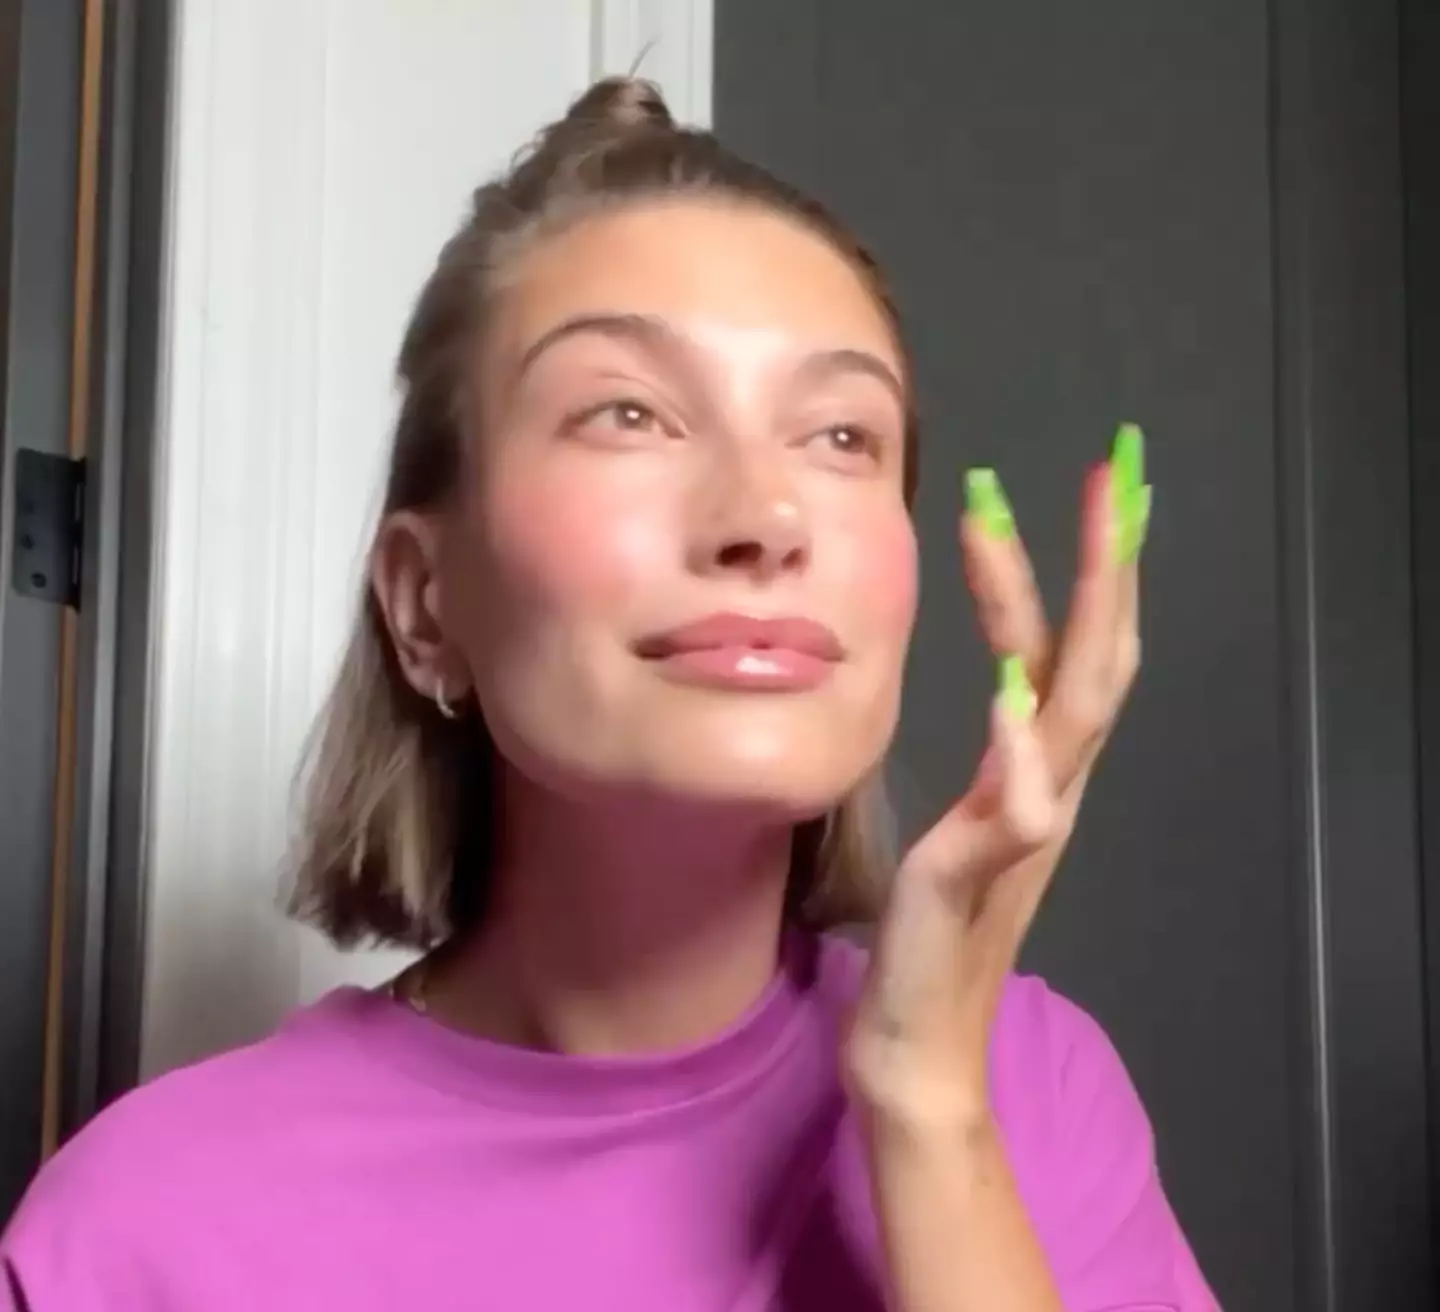 Hailey Bieber has said she's 'scared' at the thought of having children.